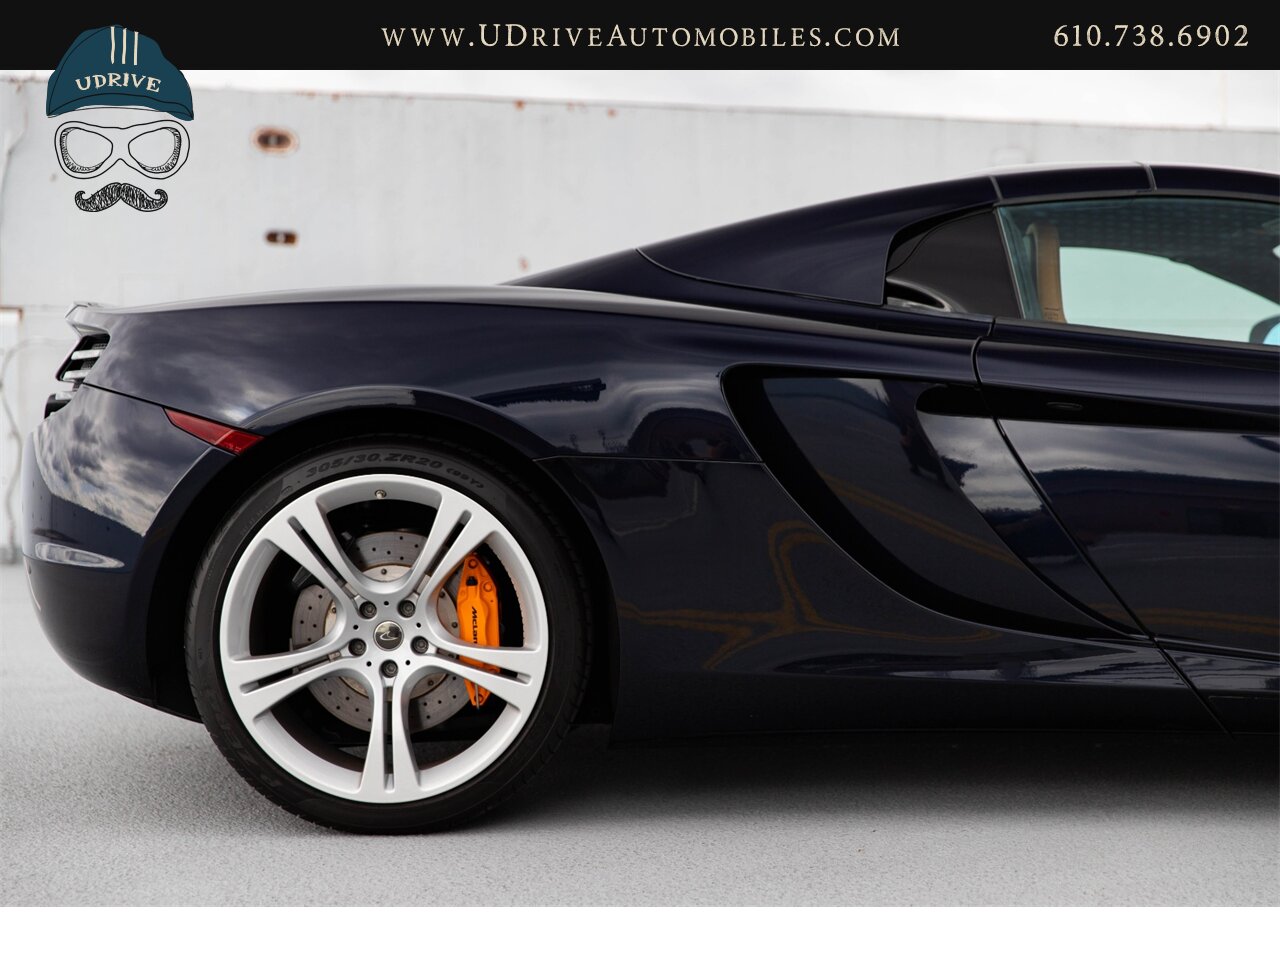 2013 McLaren MP4-12C Spider 1 Owner 6k Miles Carbon Fiber Full Leather  Sapphire Black over Natural Tan Leather - Photo 19 - West Chester, PA 19382